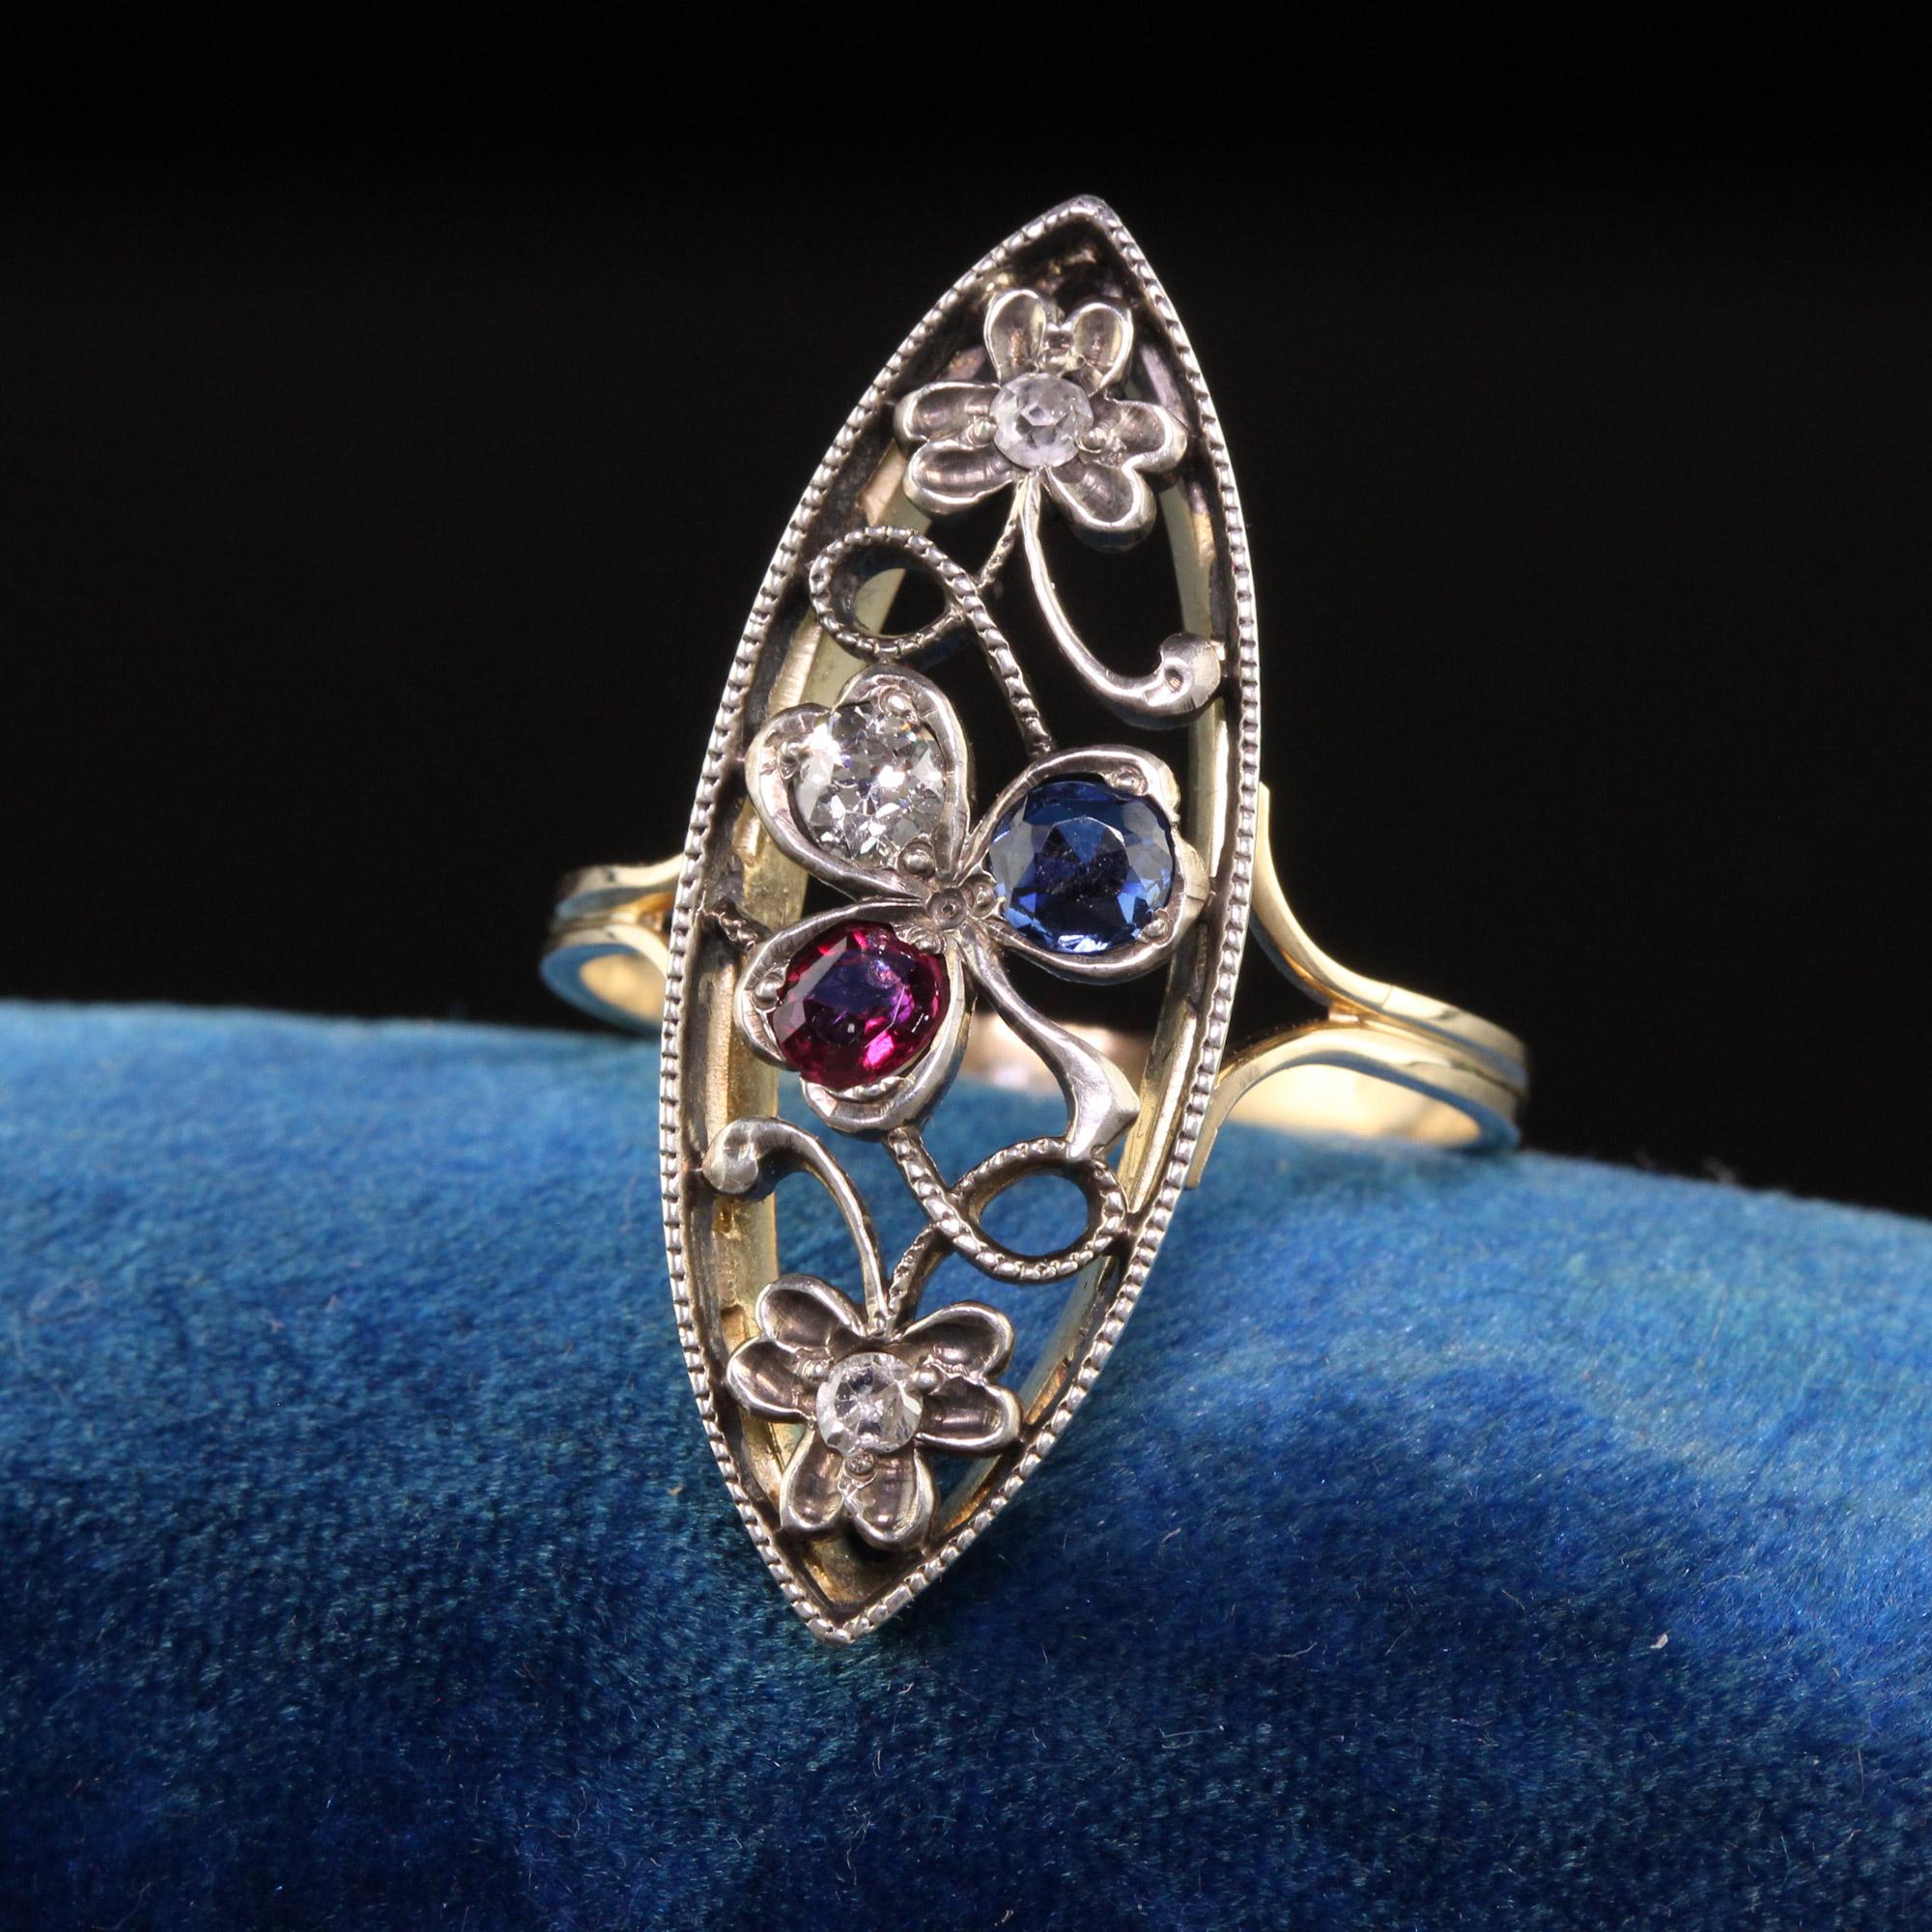 Beautiful Antique Victorian 14K Yellow Gold Silver Top Old Cut Diamond Ruby Sapphire Ring. This incredible ring is crafted in 14k yellow gold and silver top. There are old european cut diamonds set next to a natural ruby and sapphire in the clover